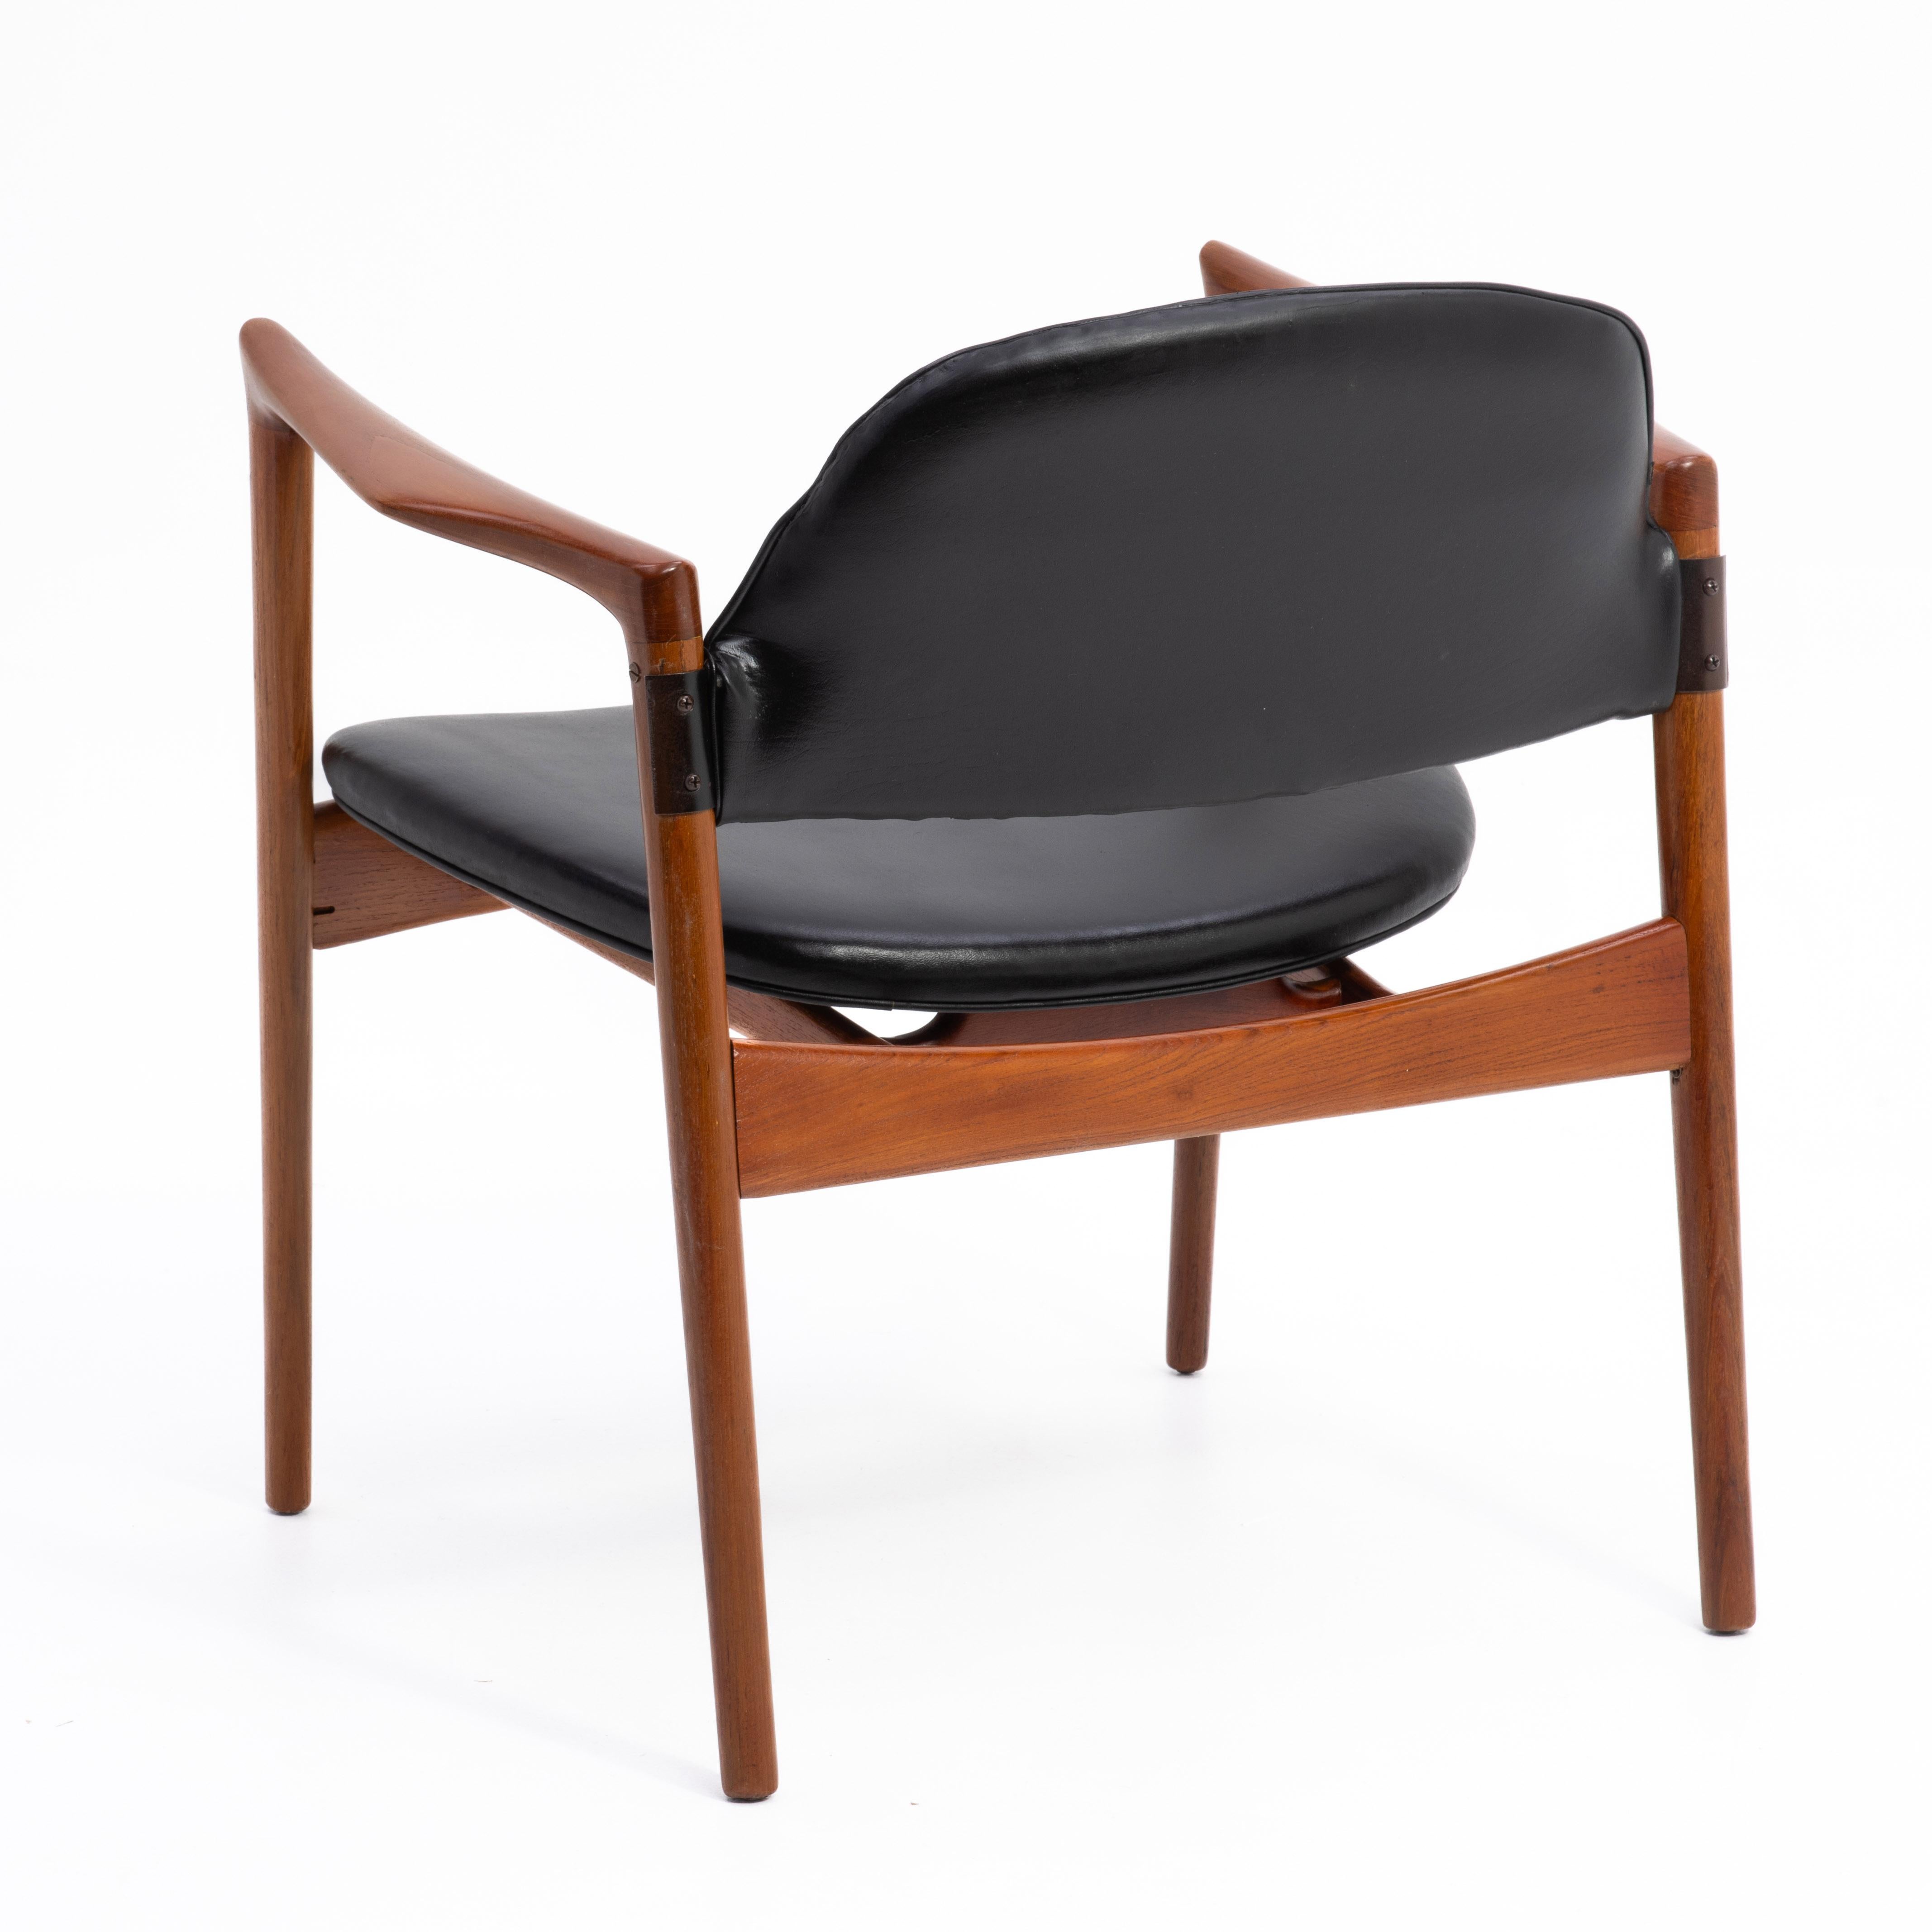 Ib Kofod Larsen Selig Denmark Danish Teak Armchair Floating Seat Restored In Good Condition For Sale In Forest Grove, PA